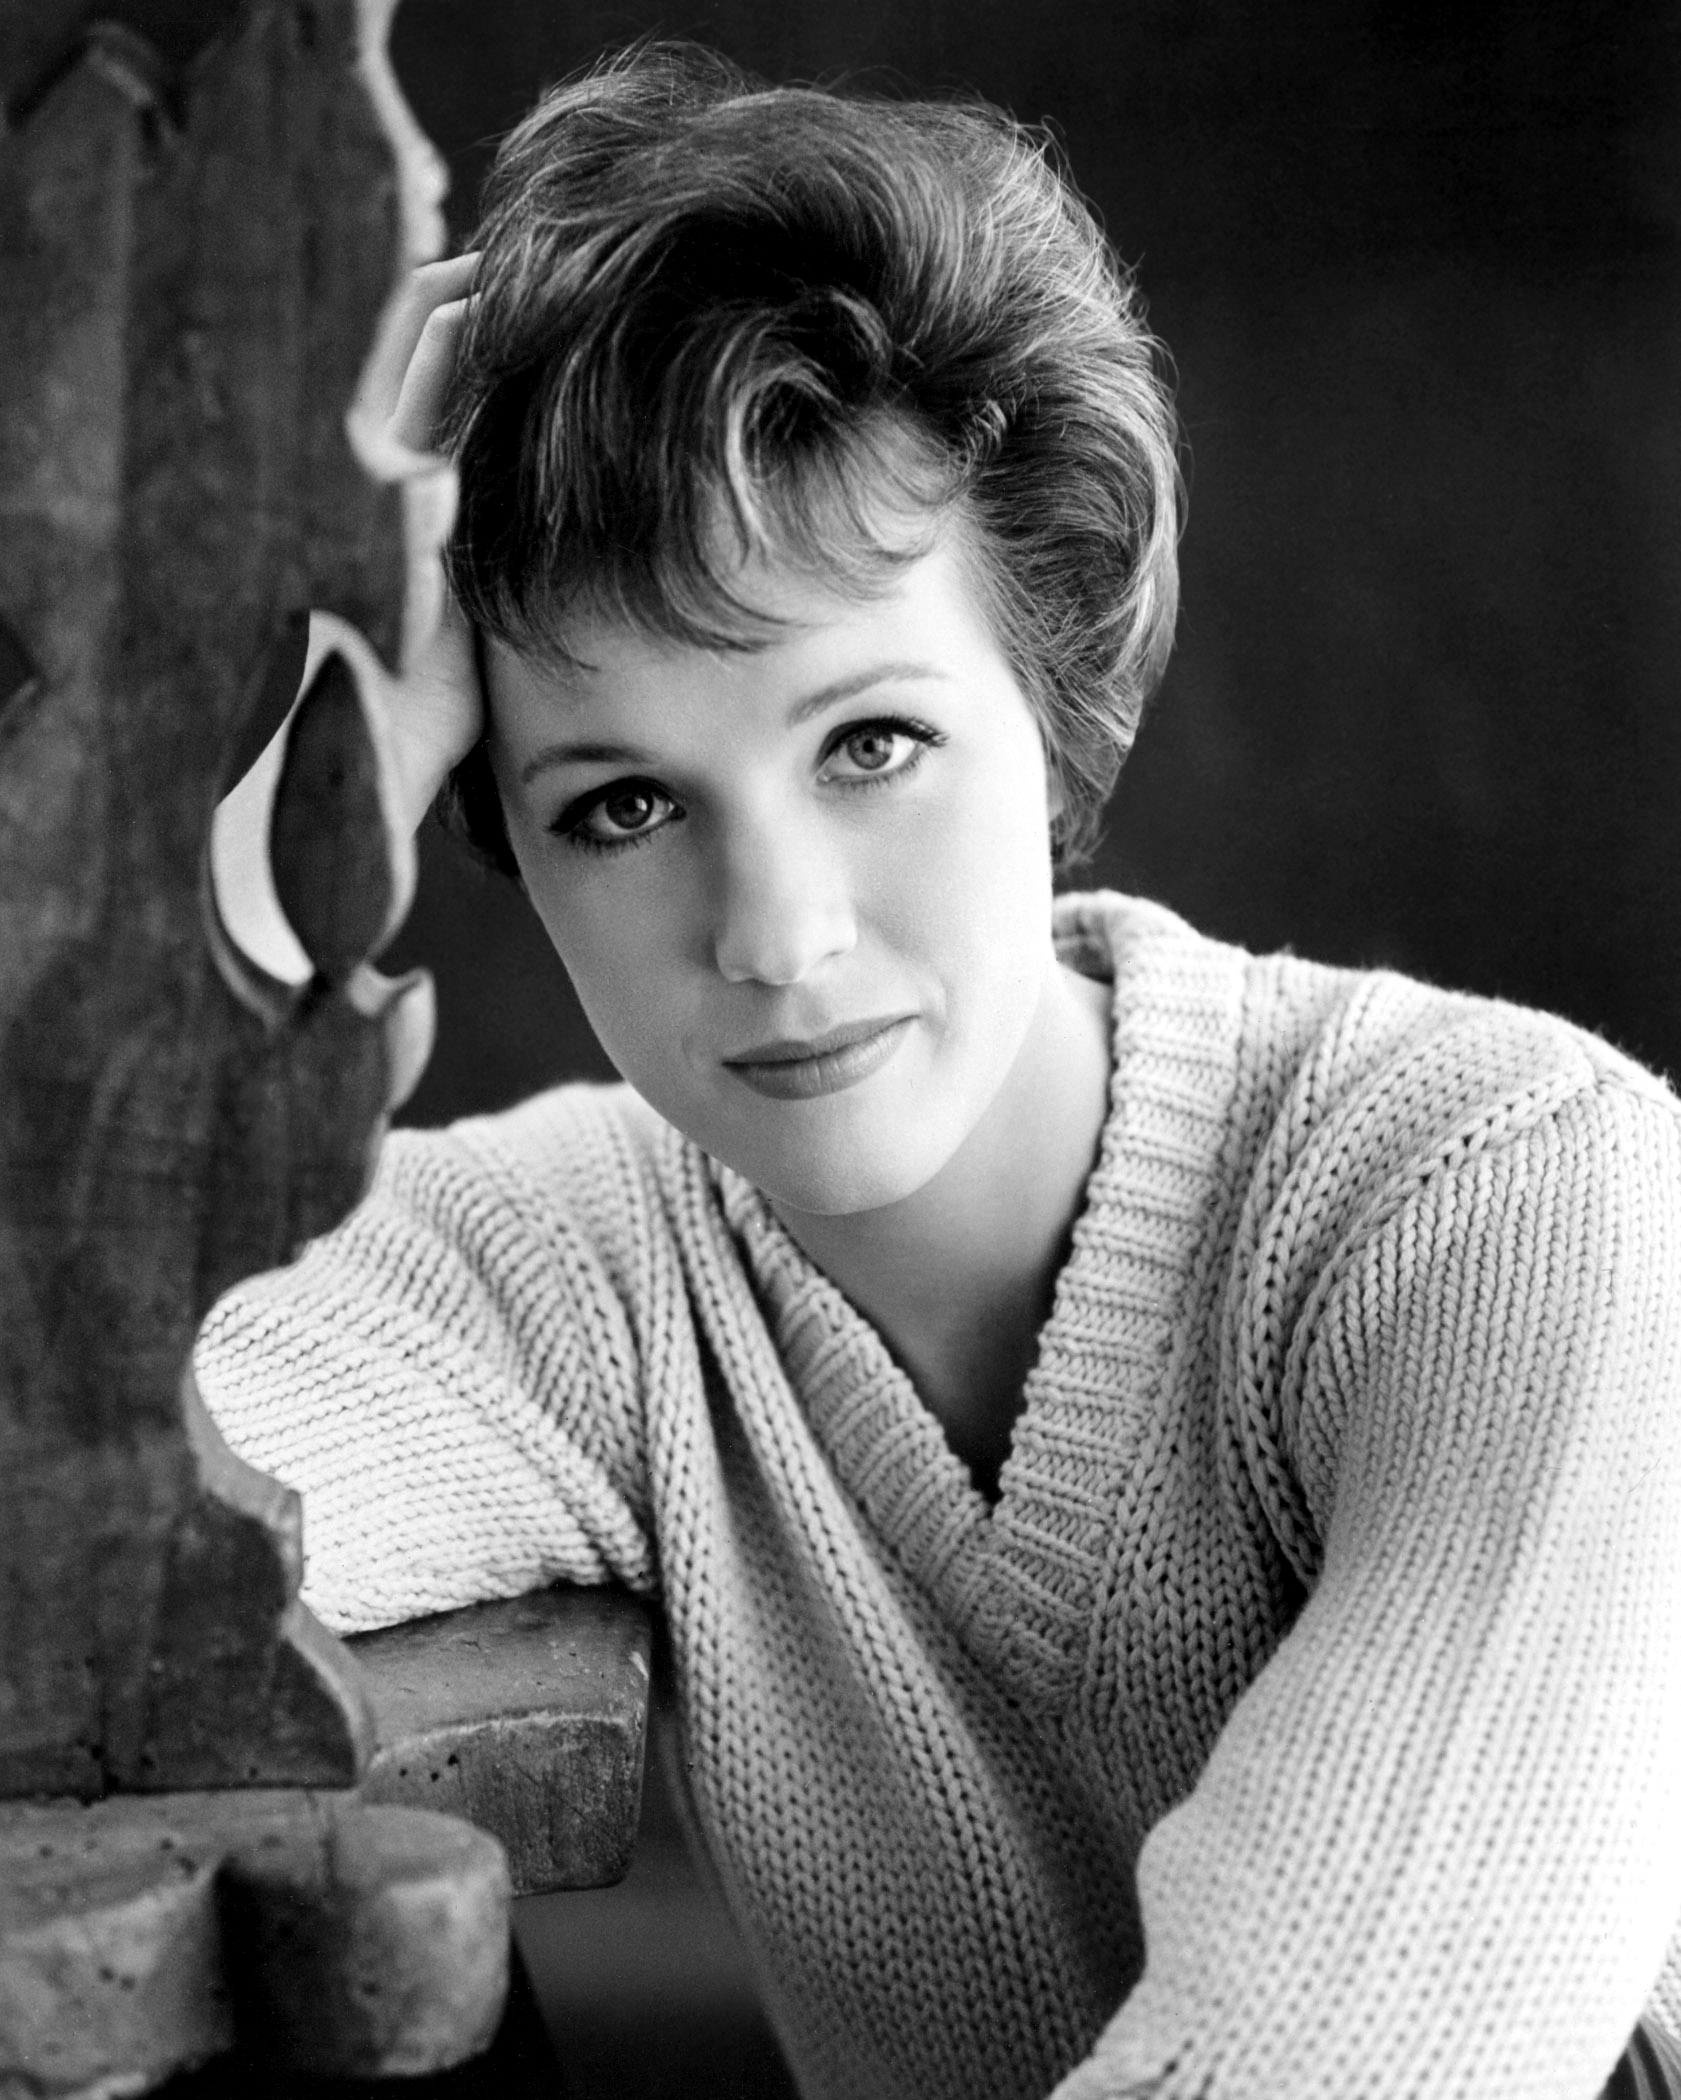 Adorable and super talented Julie Andrews in one of her first shoots sometime in the late 1950s. Andrews had done very little before her breakout performance in Mary Poppins in 1964.